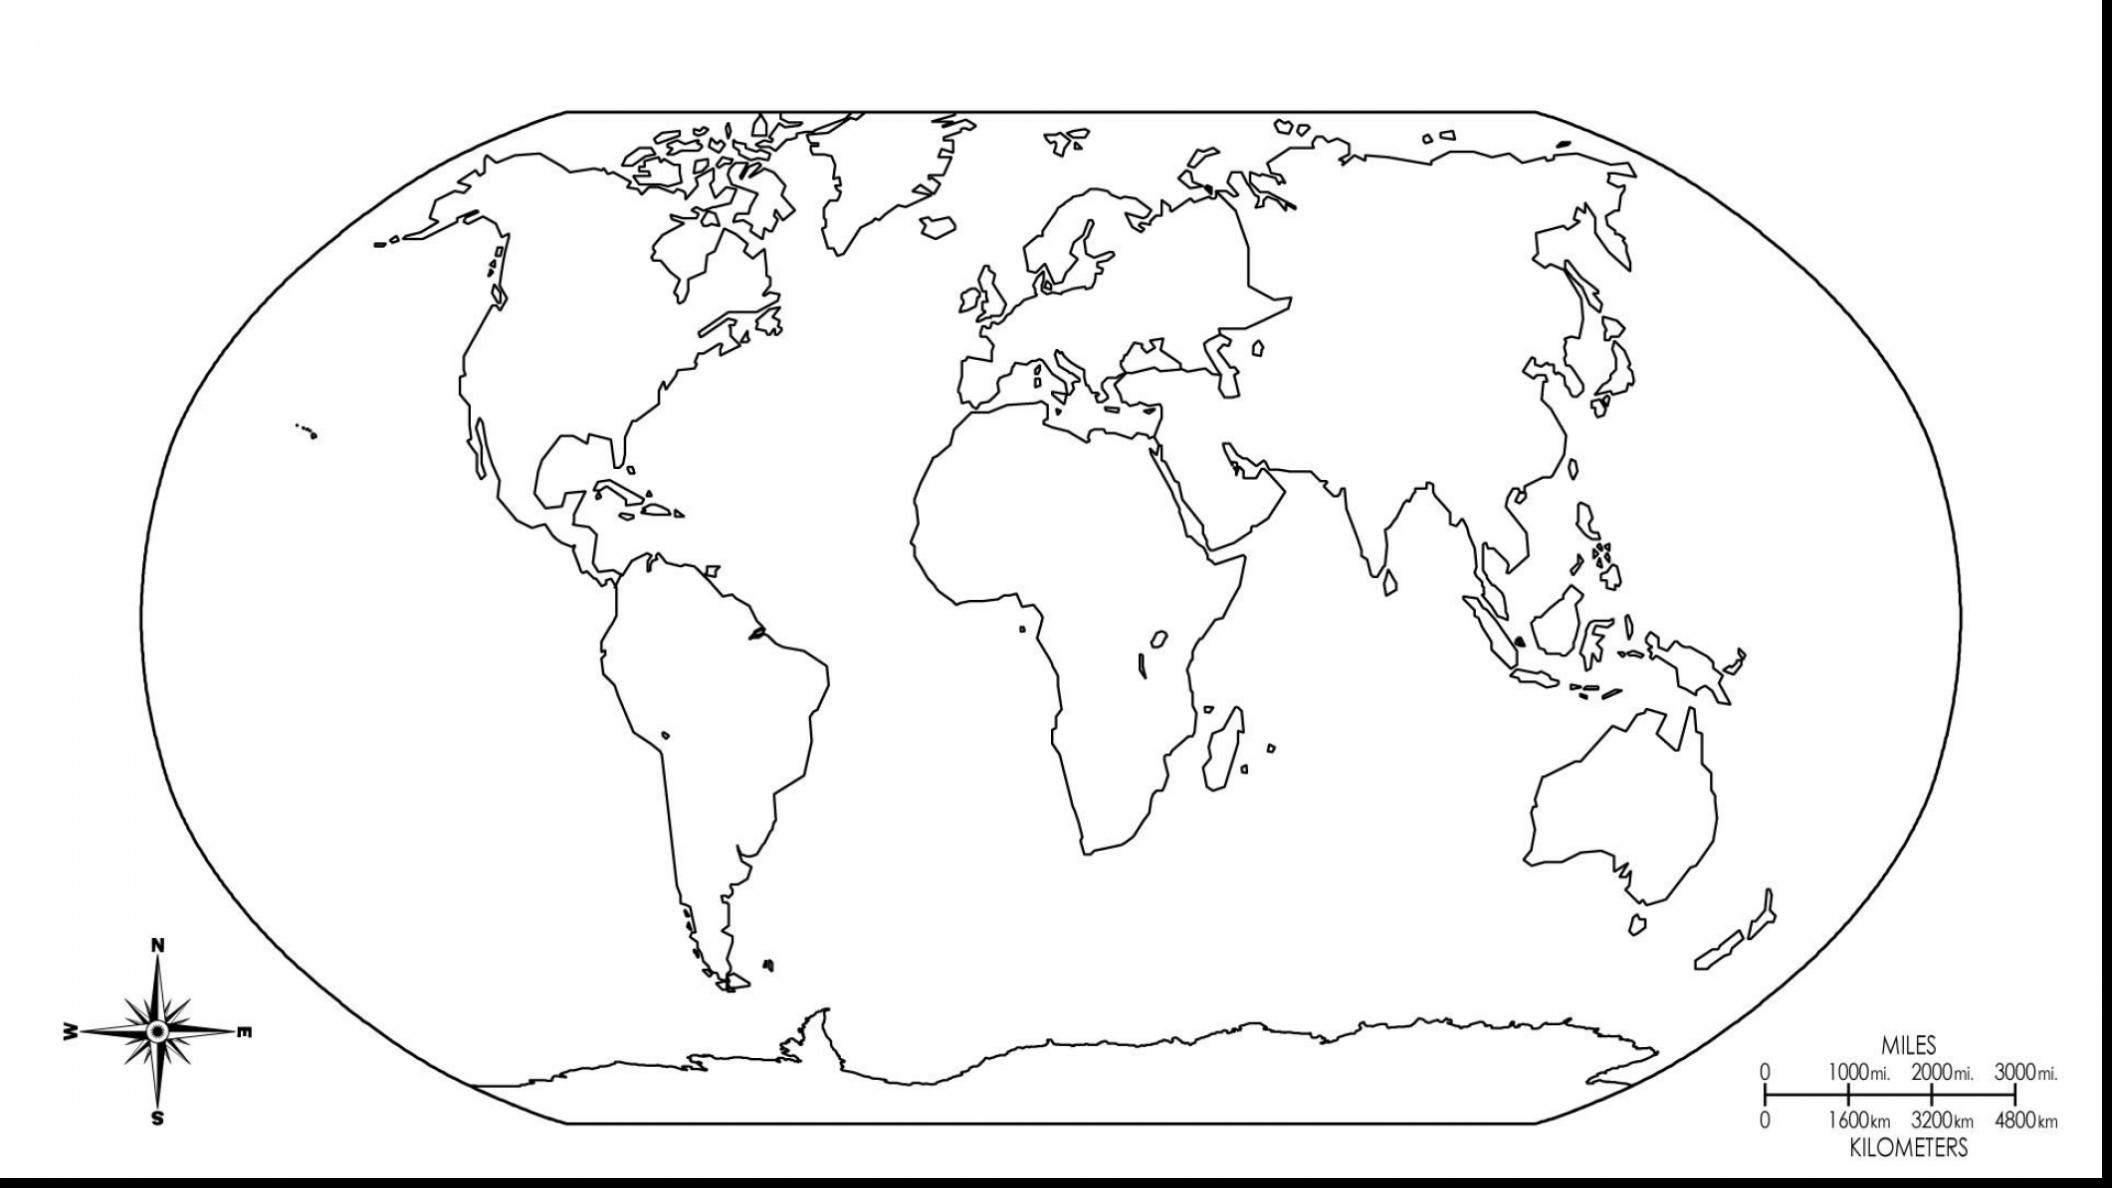 World Map coloring, Download World Map coloring for free 2019